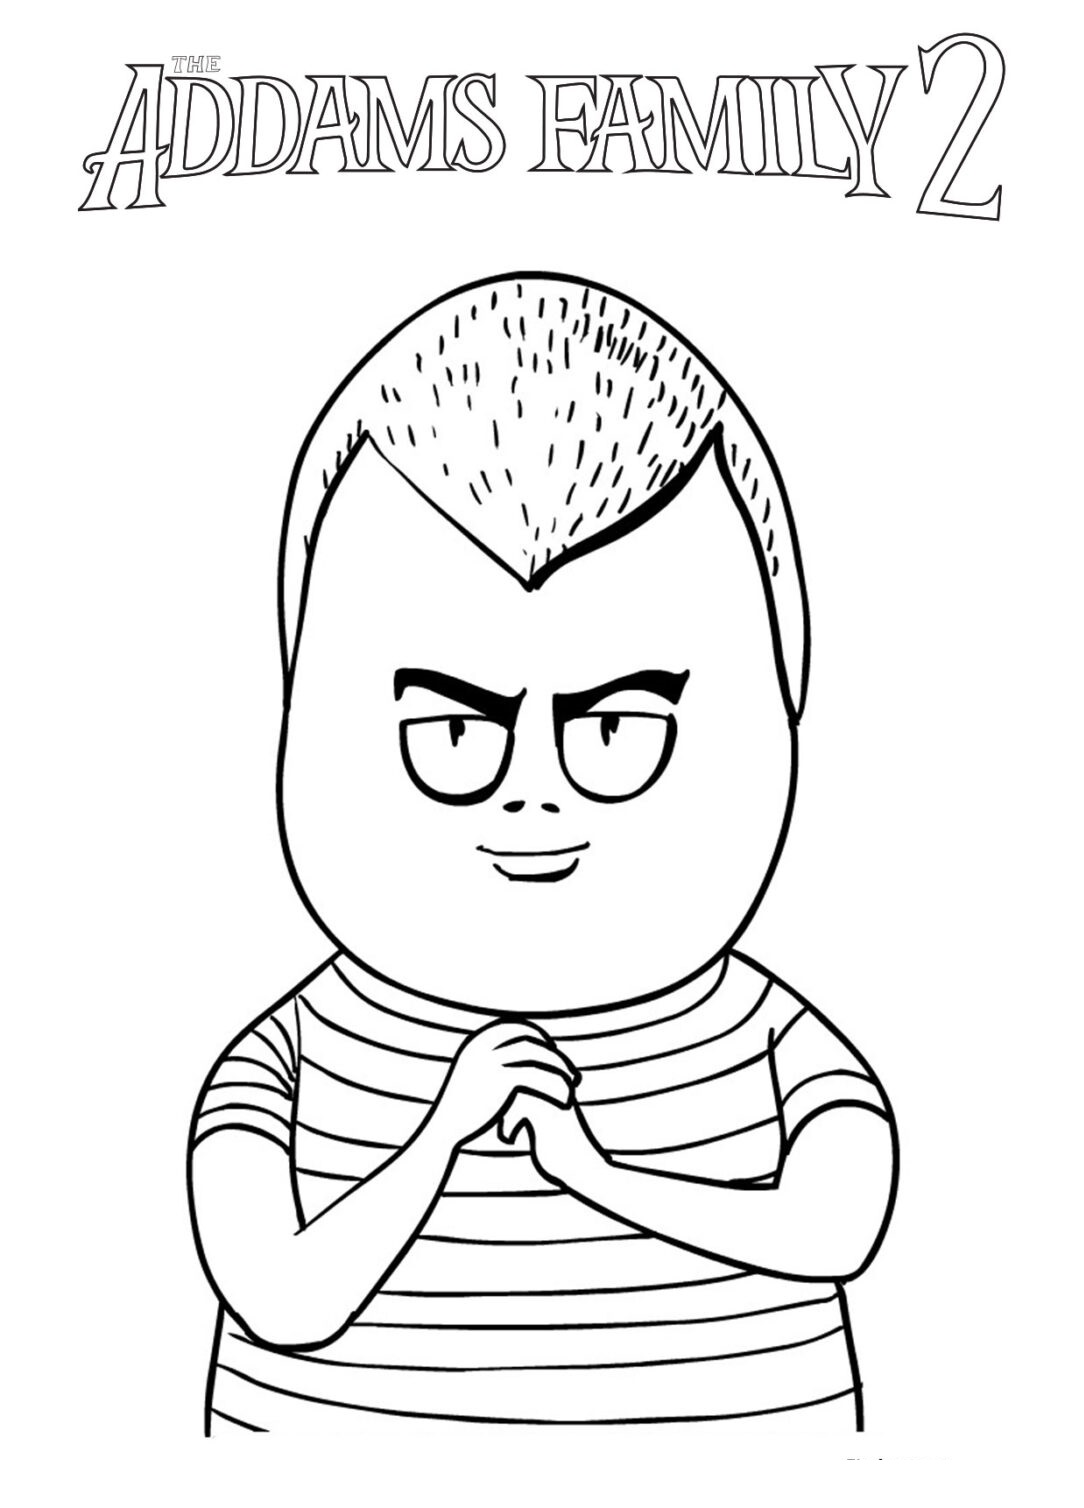 The Addams Family Coloring Pages: A Timeless Icon of Gothic Culture - Pugsley Addams Family Coloring Pages